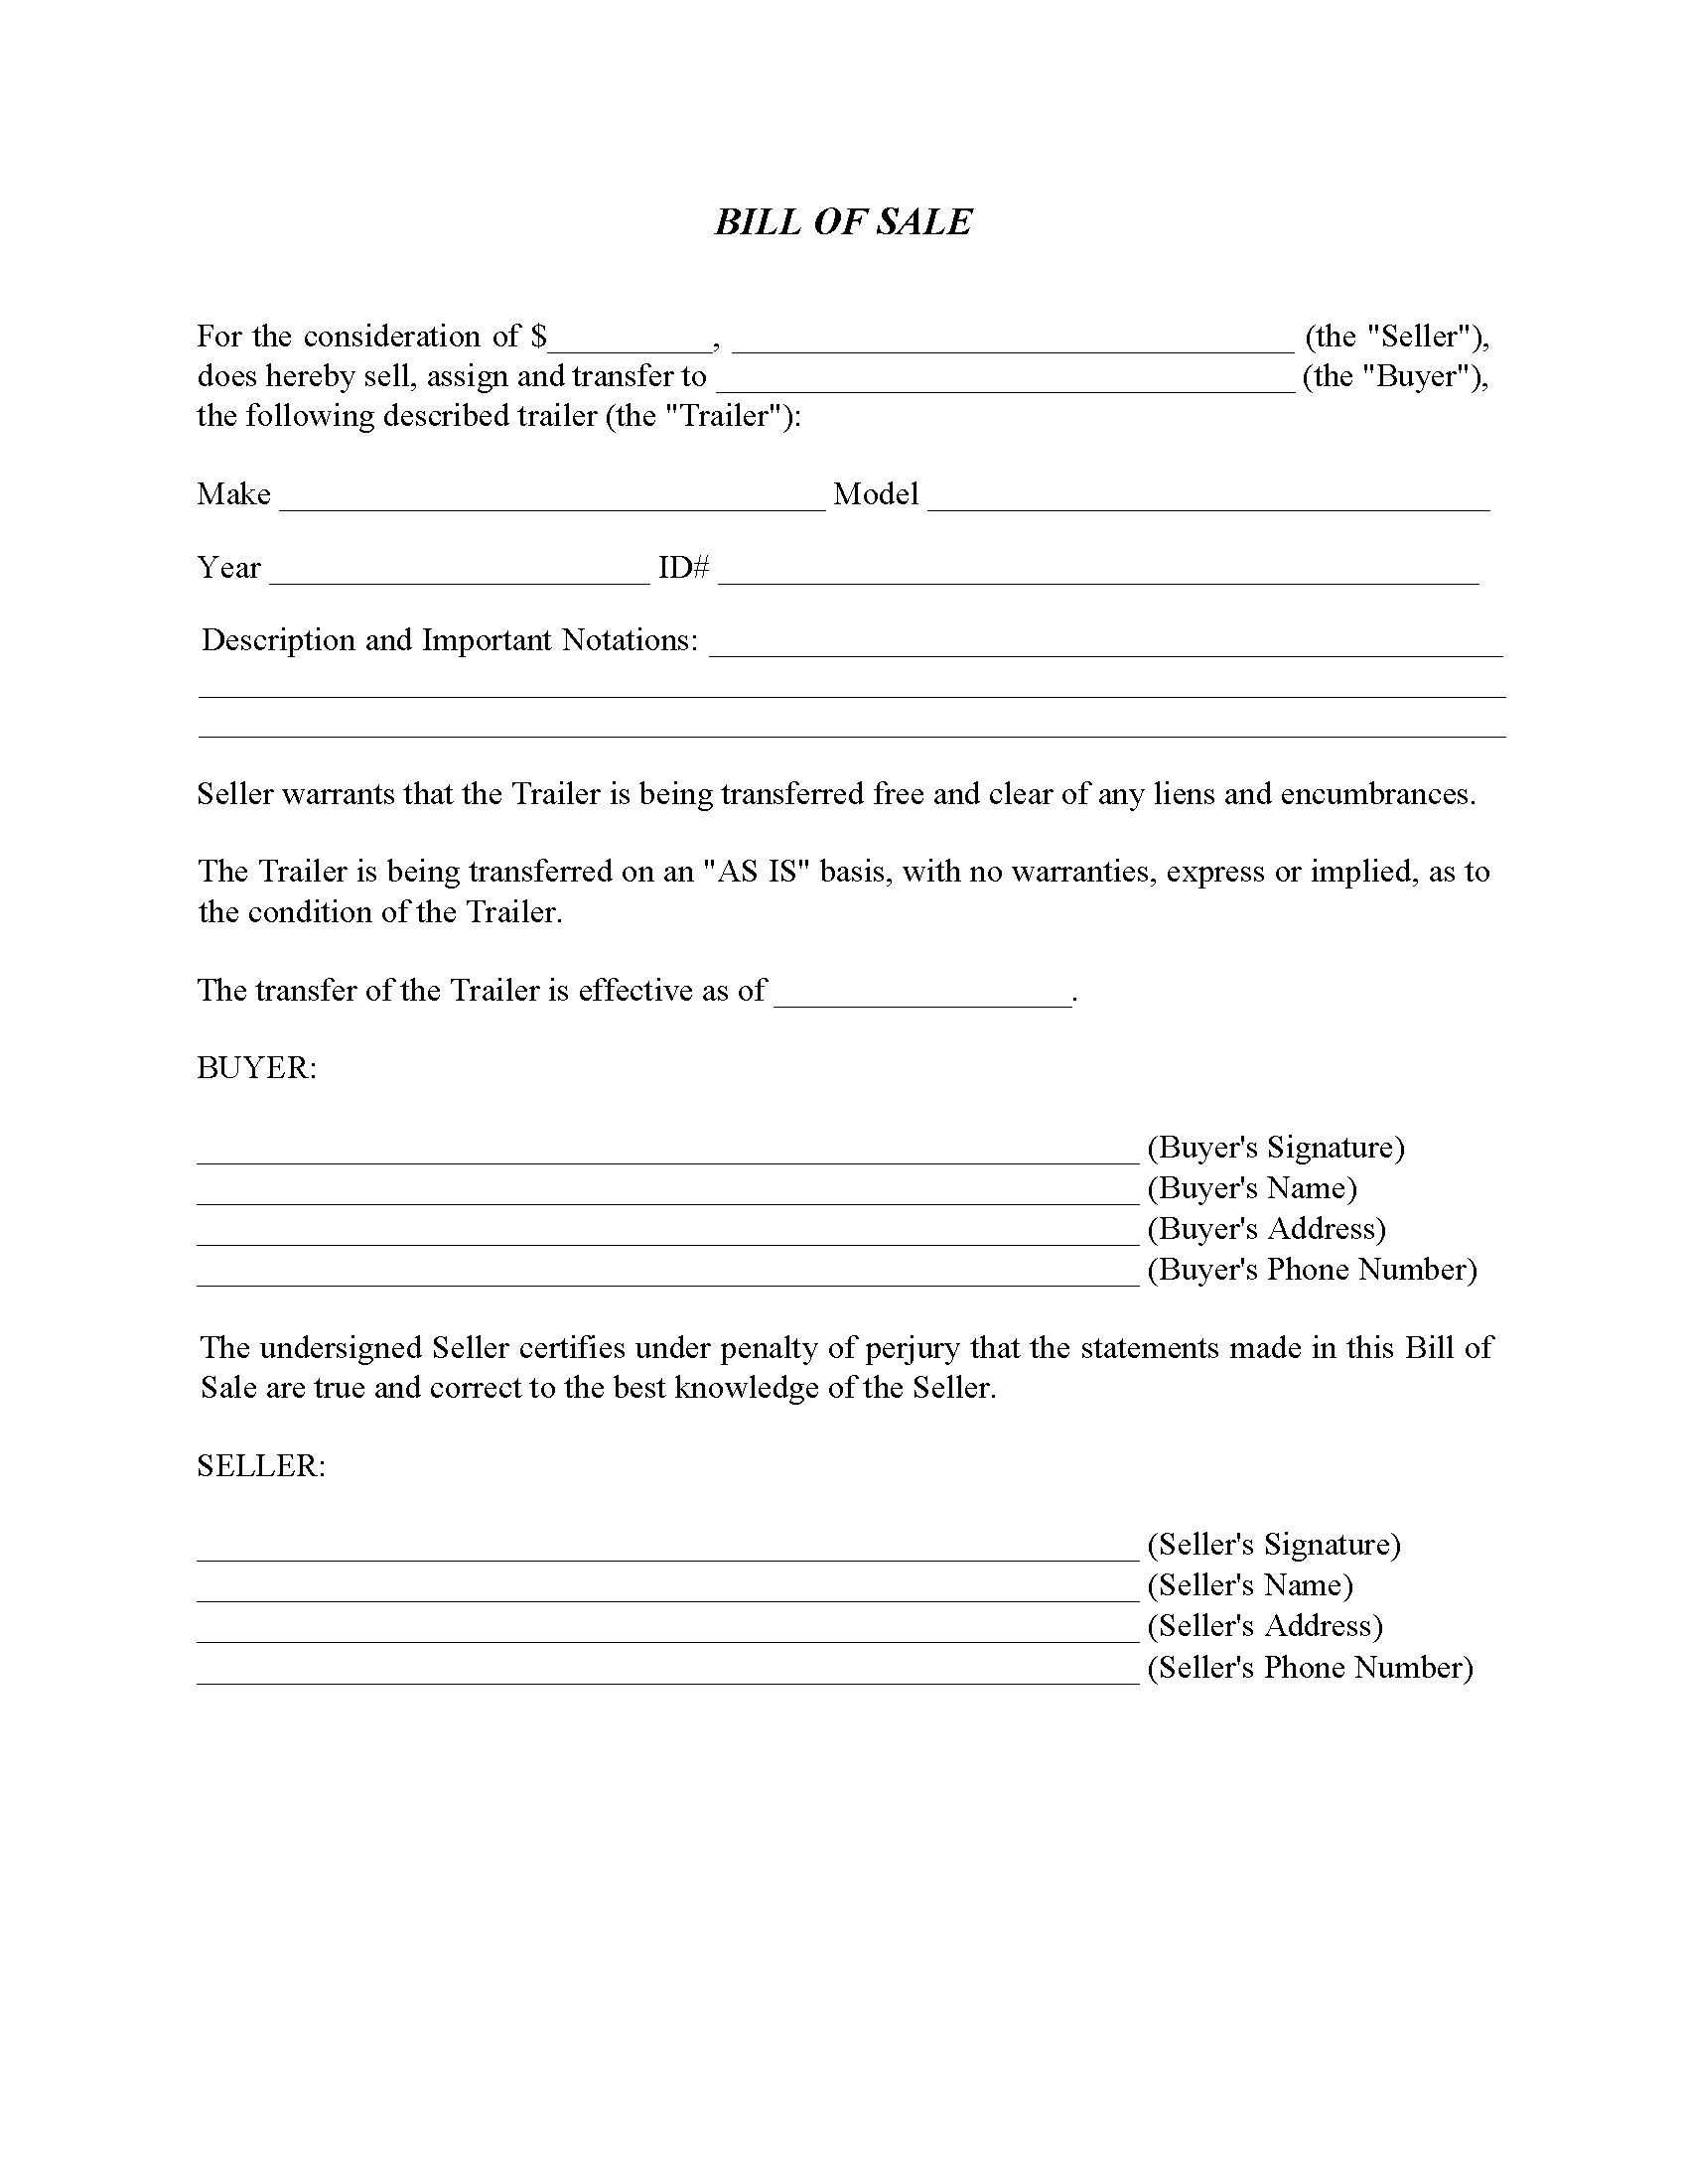 Ohio Trailer Bill of Sale Form - Free Printable Legal Forms